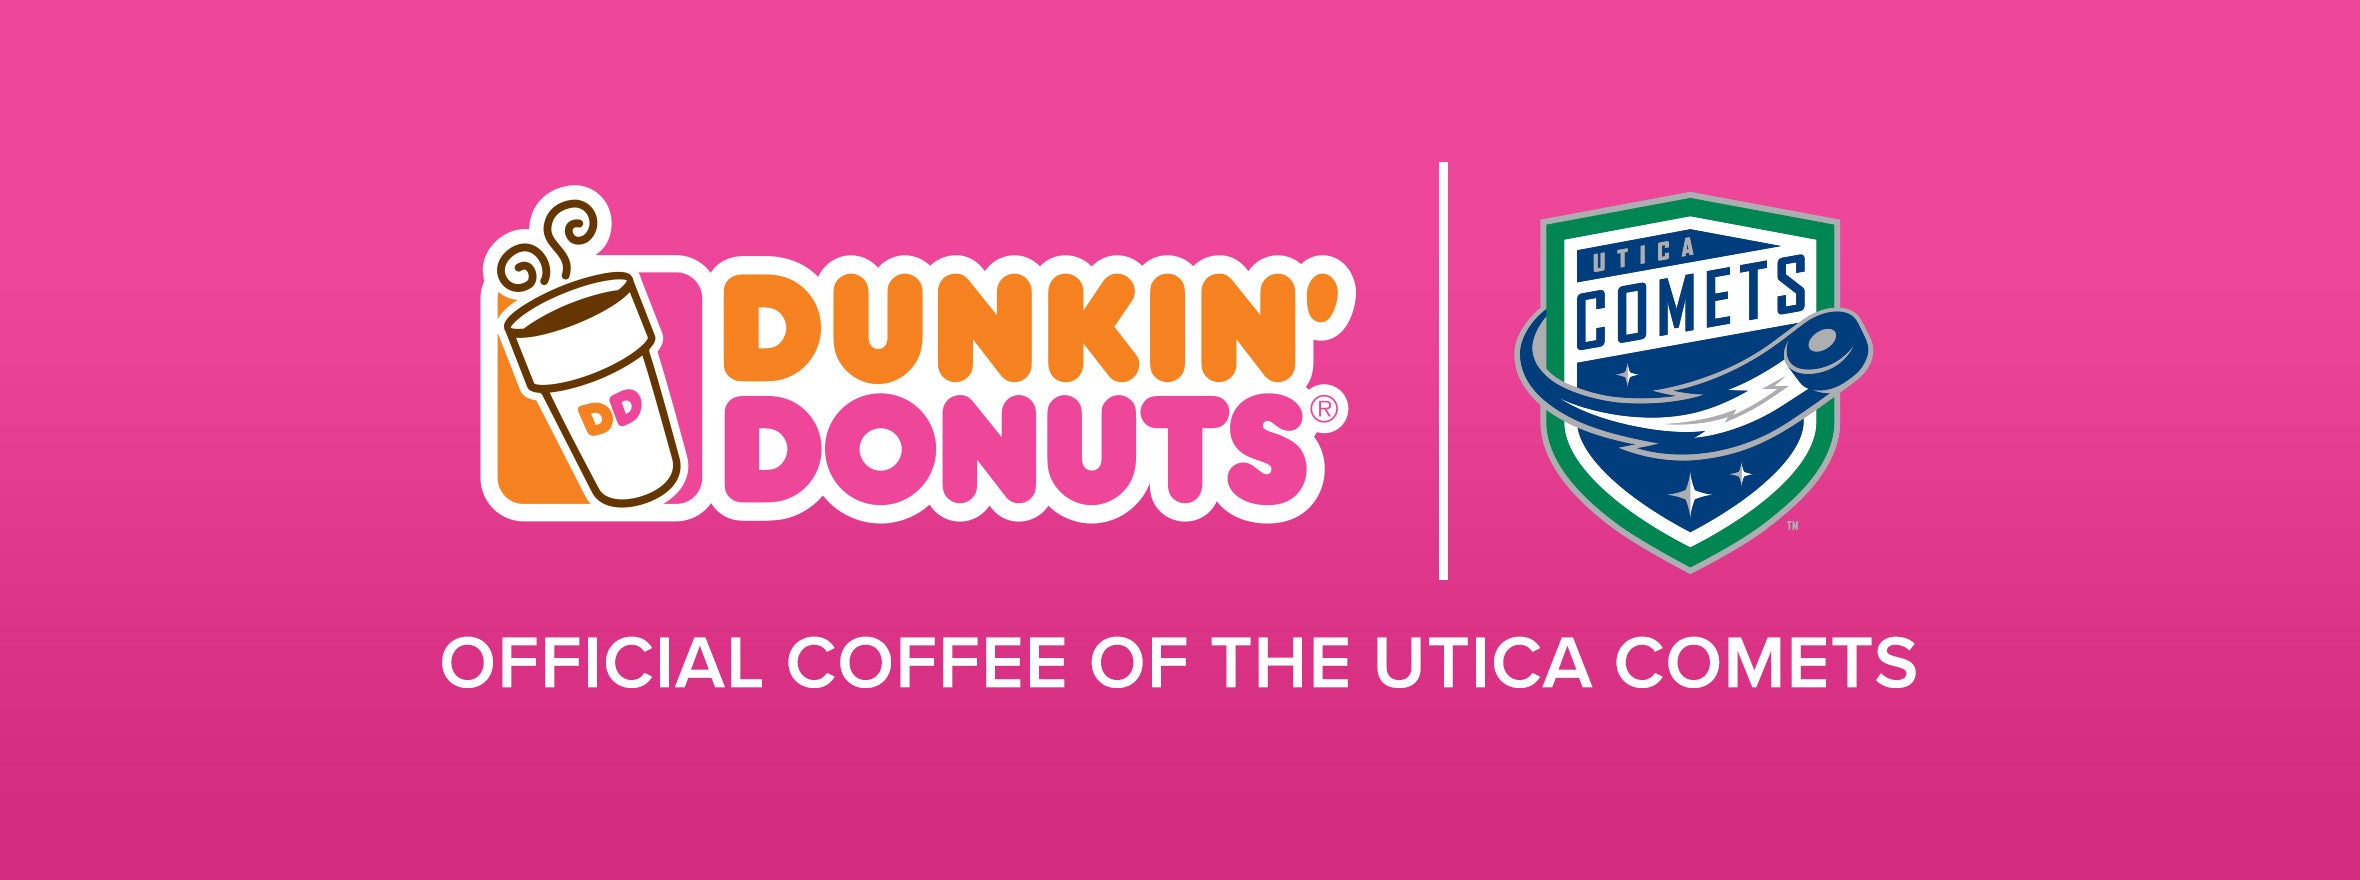 DUNKIN DONUTS NAMED OFFICIAL COFFEE 